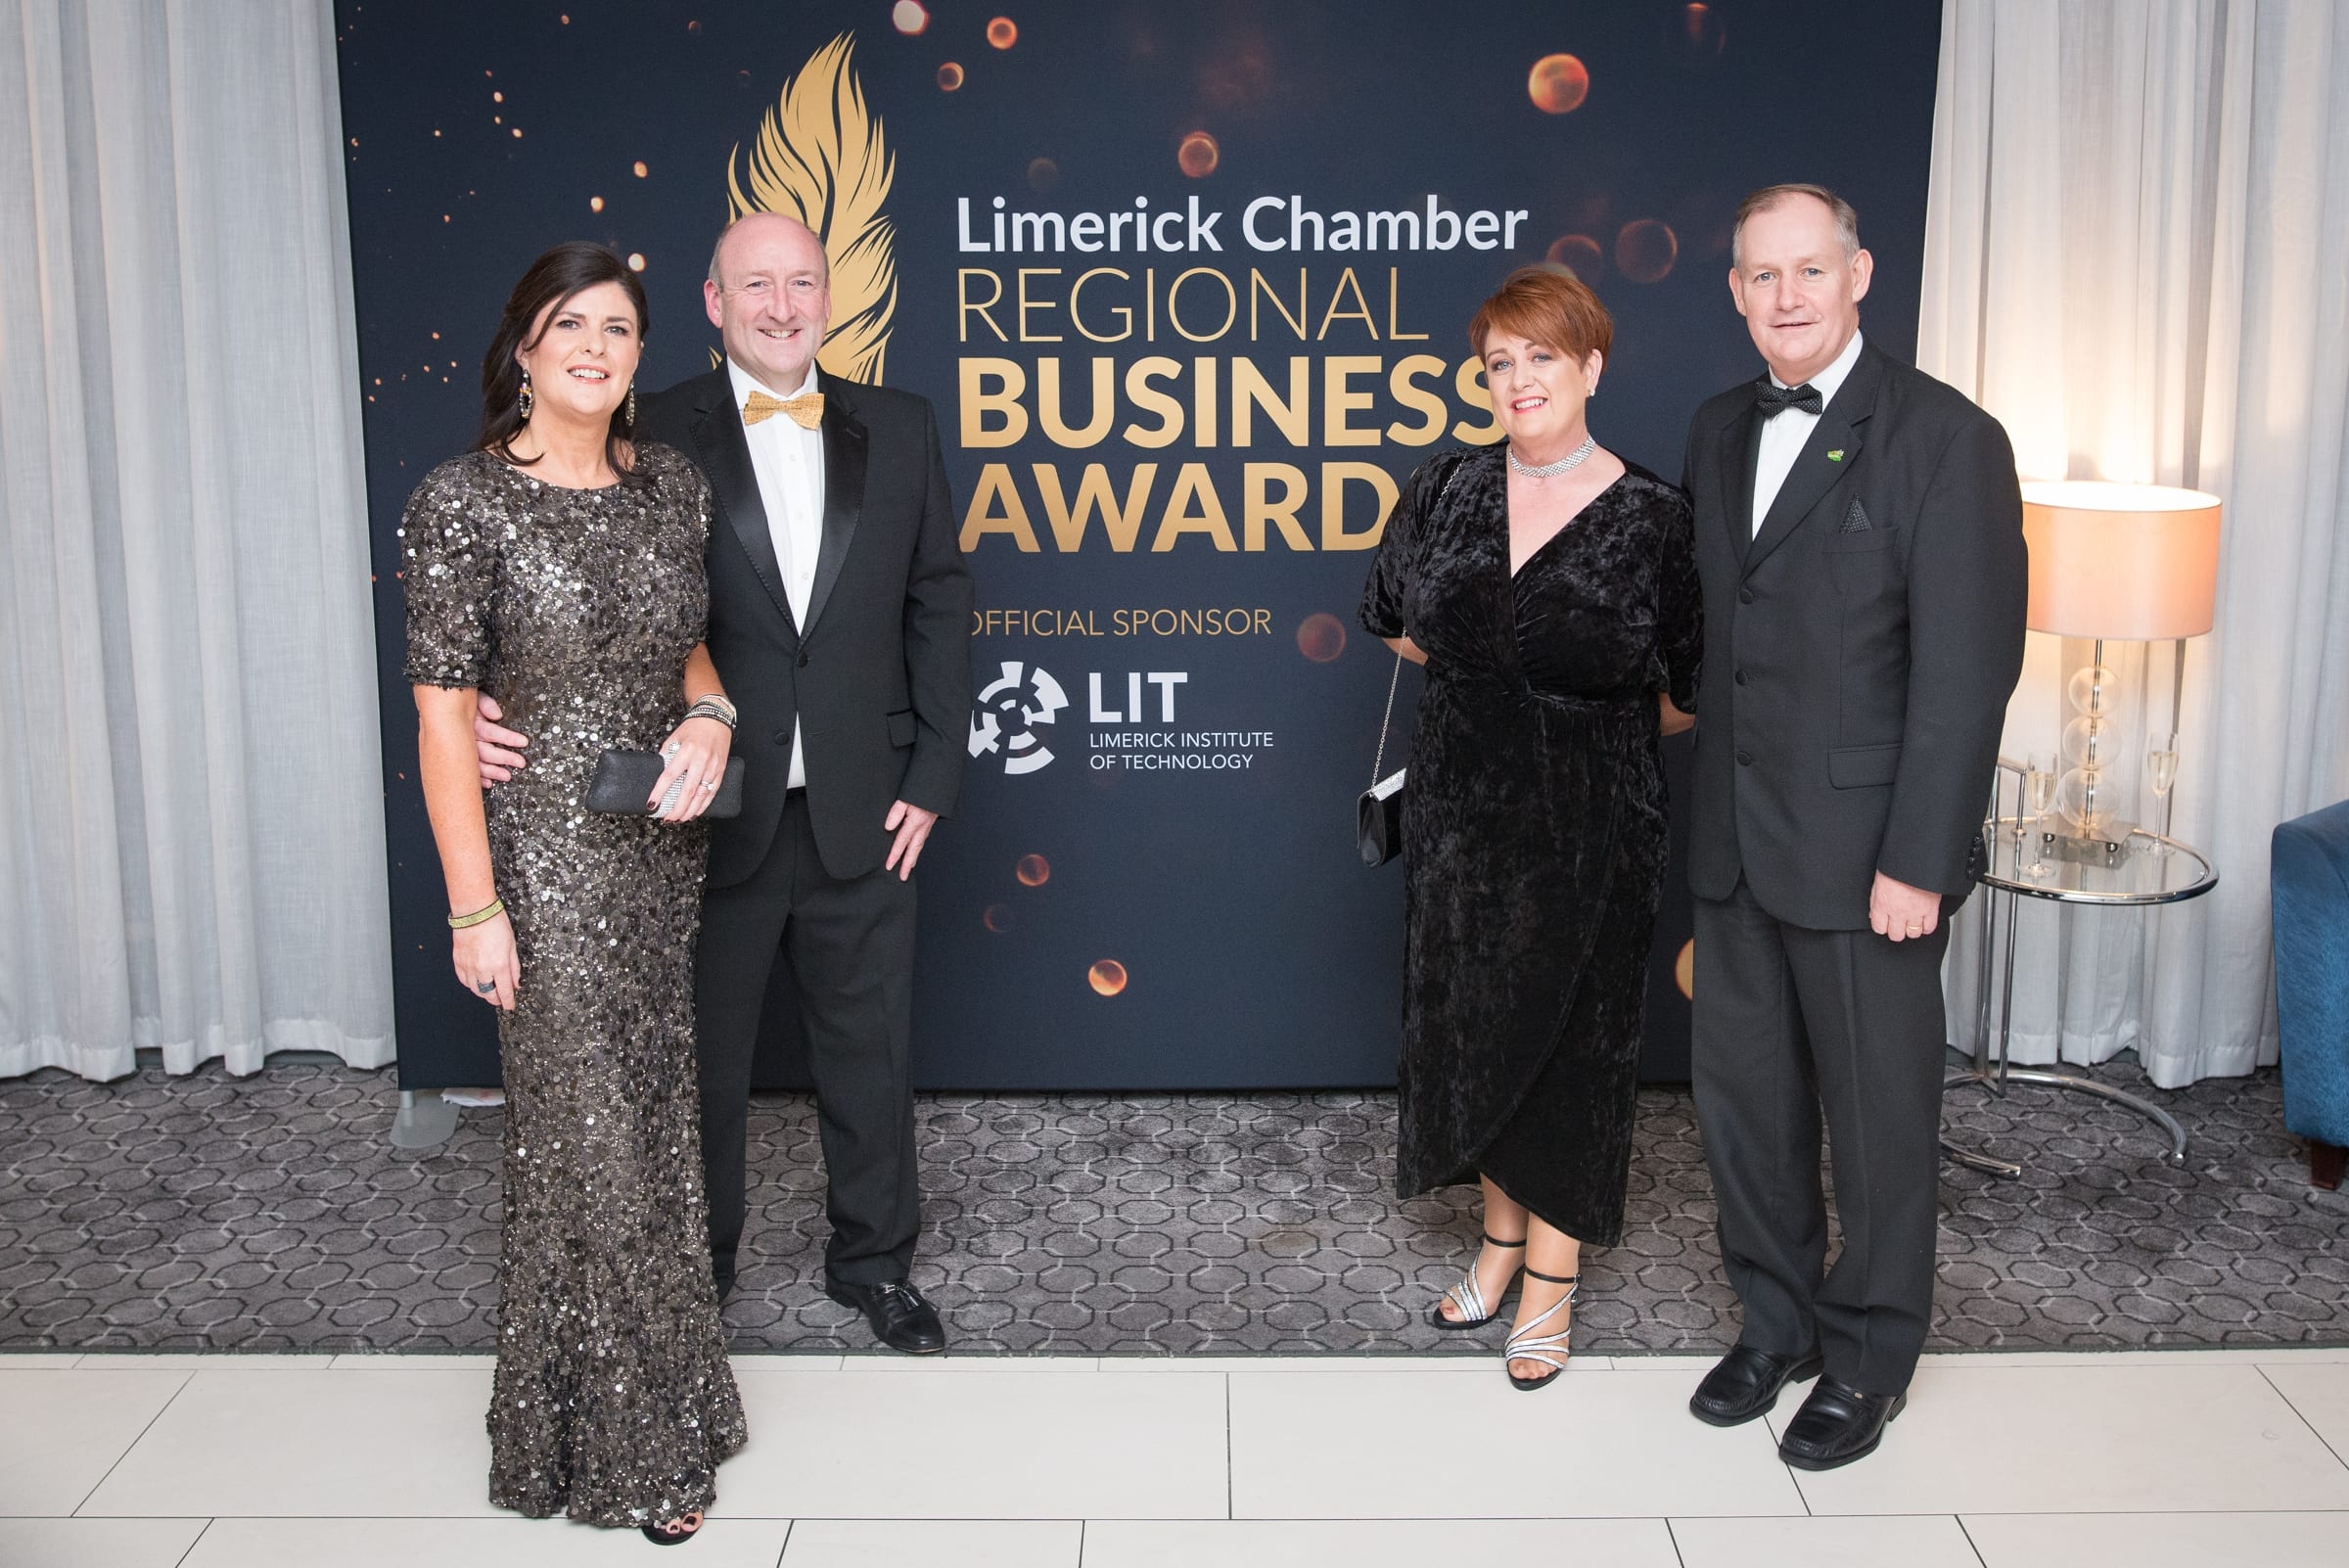 No repro fee- limerick chamber president's dinner- 16-11-2018, From Left to Right: Mary Daly, Dr. Paul Daly - Limerick City and County Council, Ann and Conn Murray - Limerick City Manager. 
Photo credit Shauna Kennedy